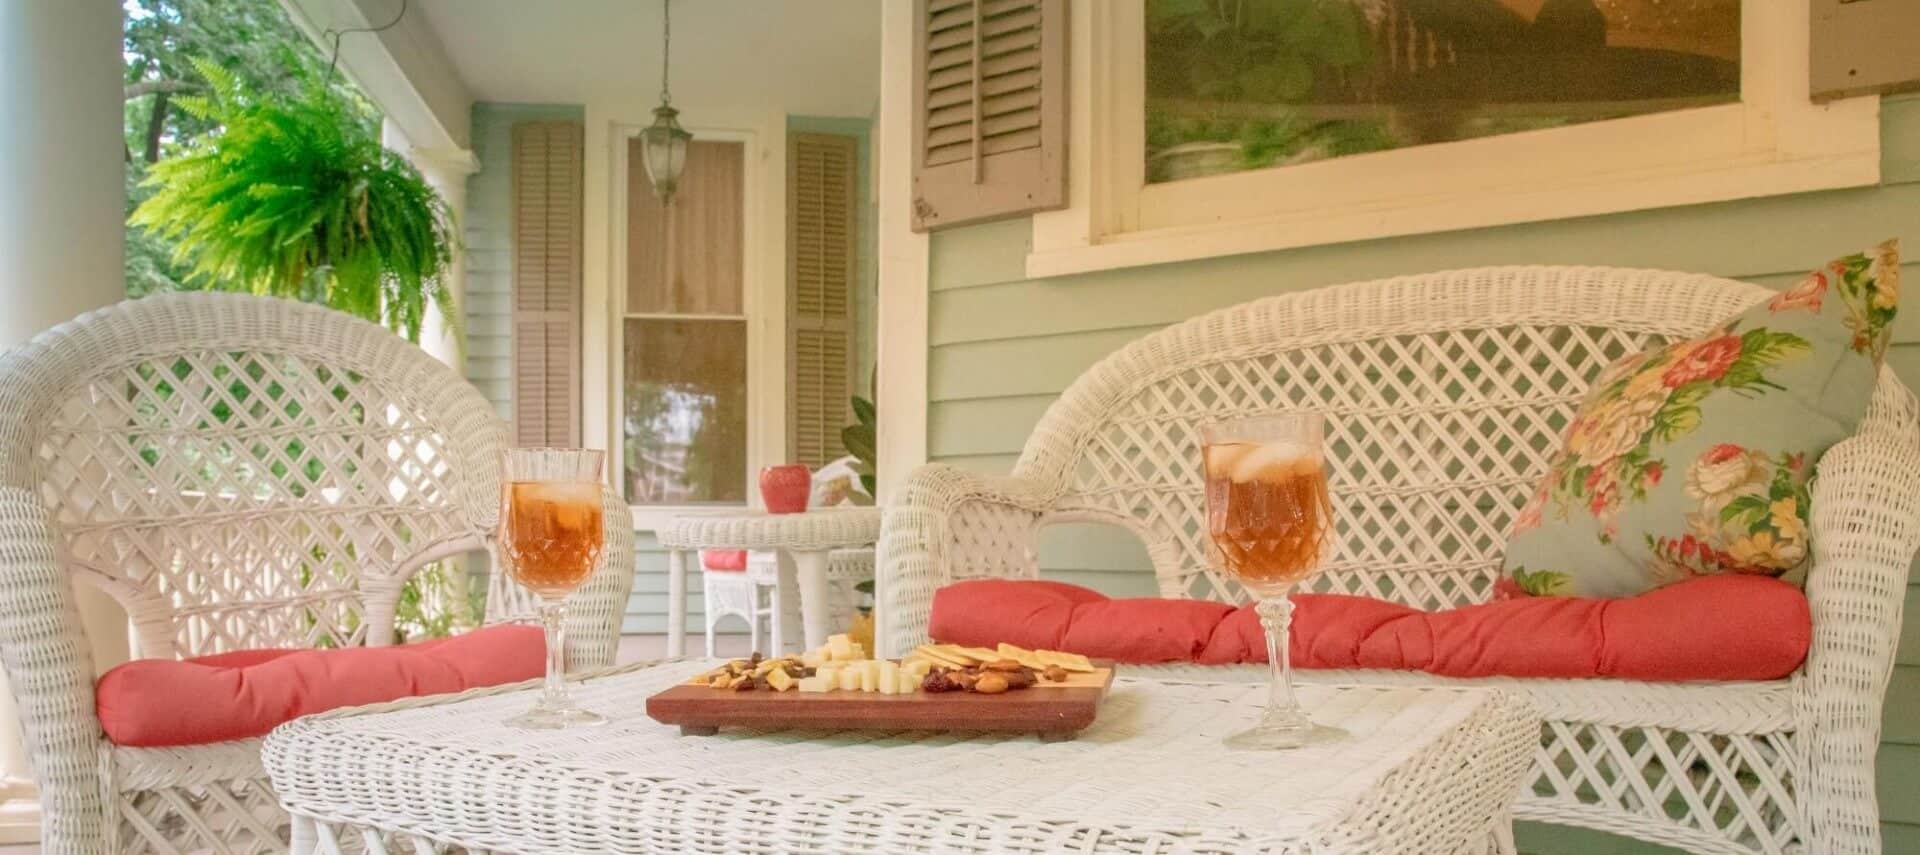 close up of meat and cheese board and iced tea on a white wicker table surrounded by wicker chairs